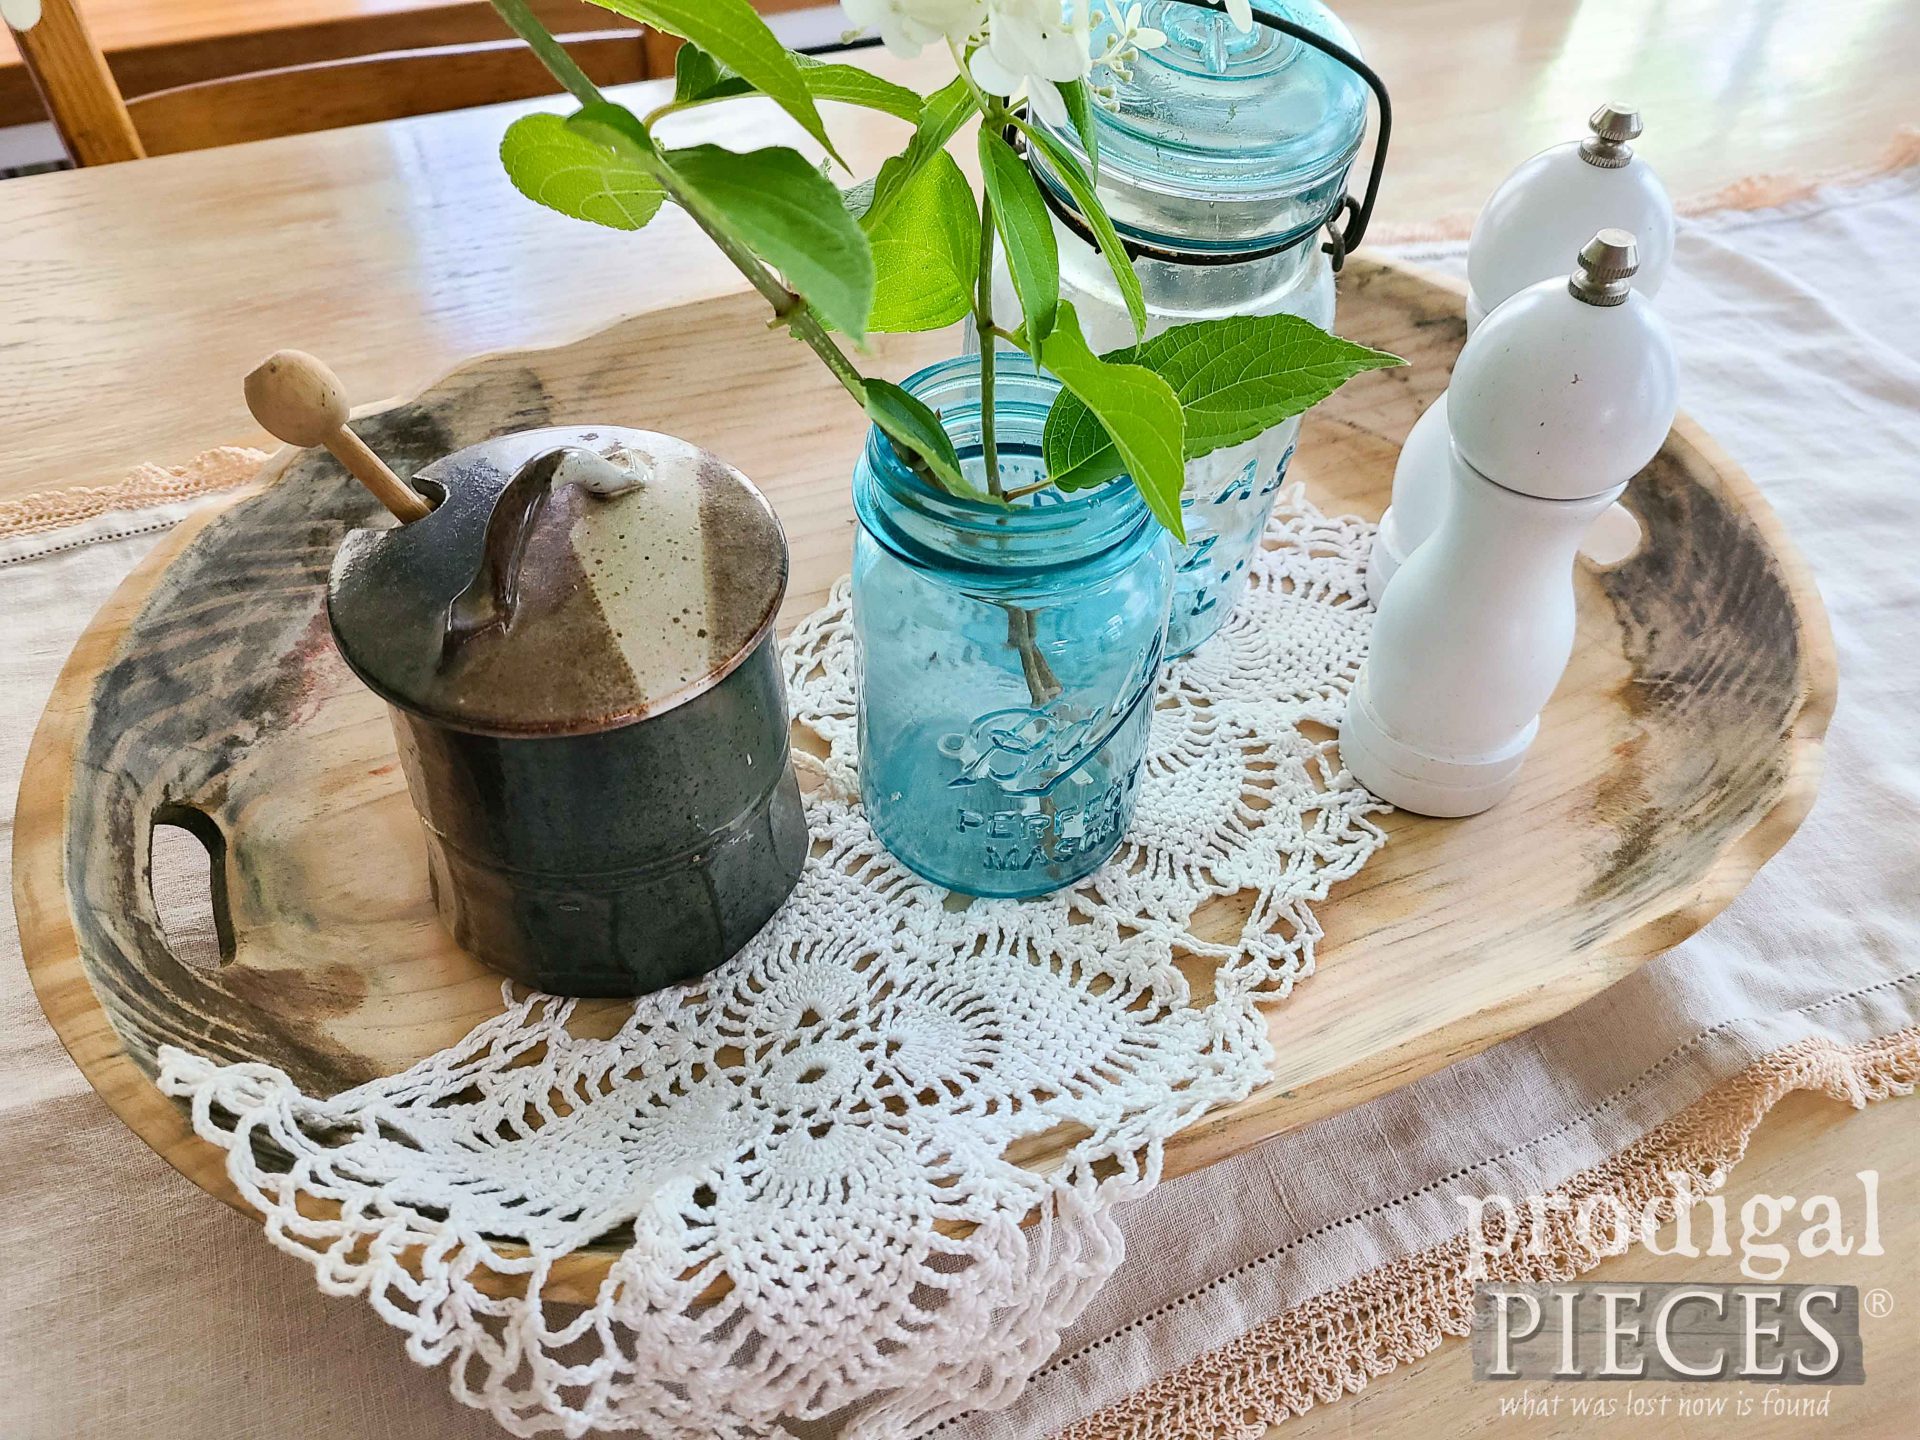 Rustic Farmhouse Dough Bowl Makeover from Tourist Token by Larissa of Prodigal Pieces | prodigalpieces.com #prodigalpieces #rustic #diy #home #farmhouse